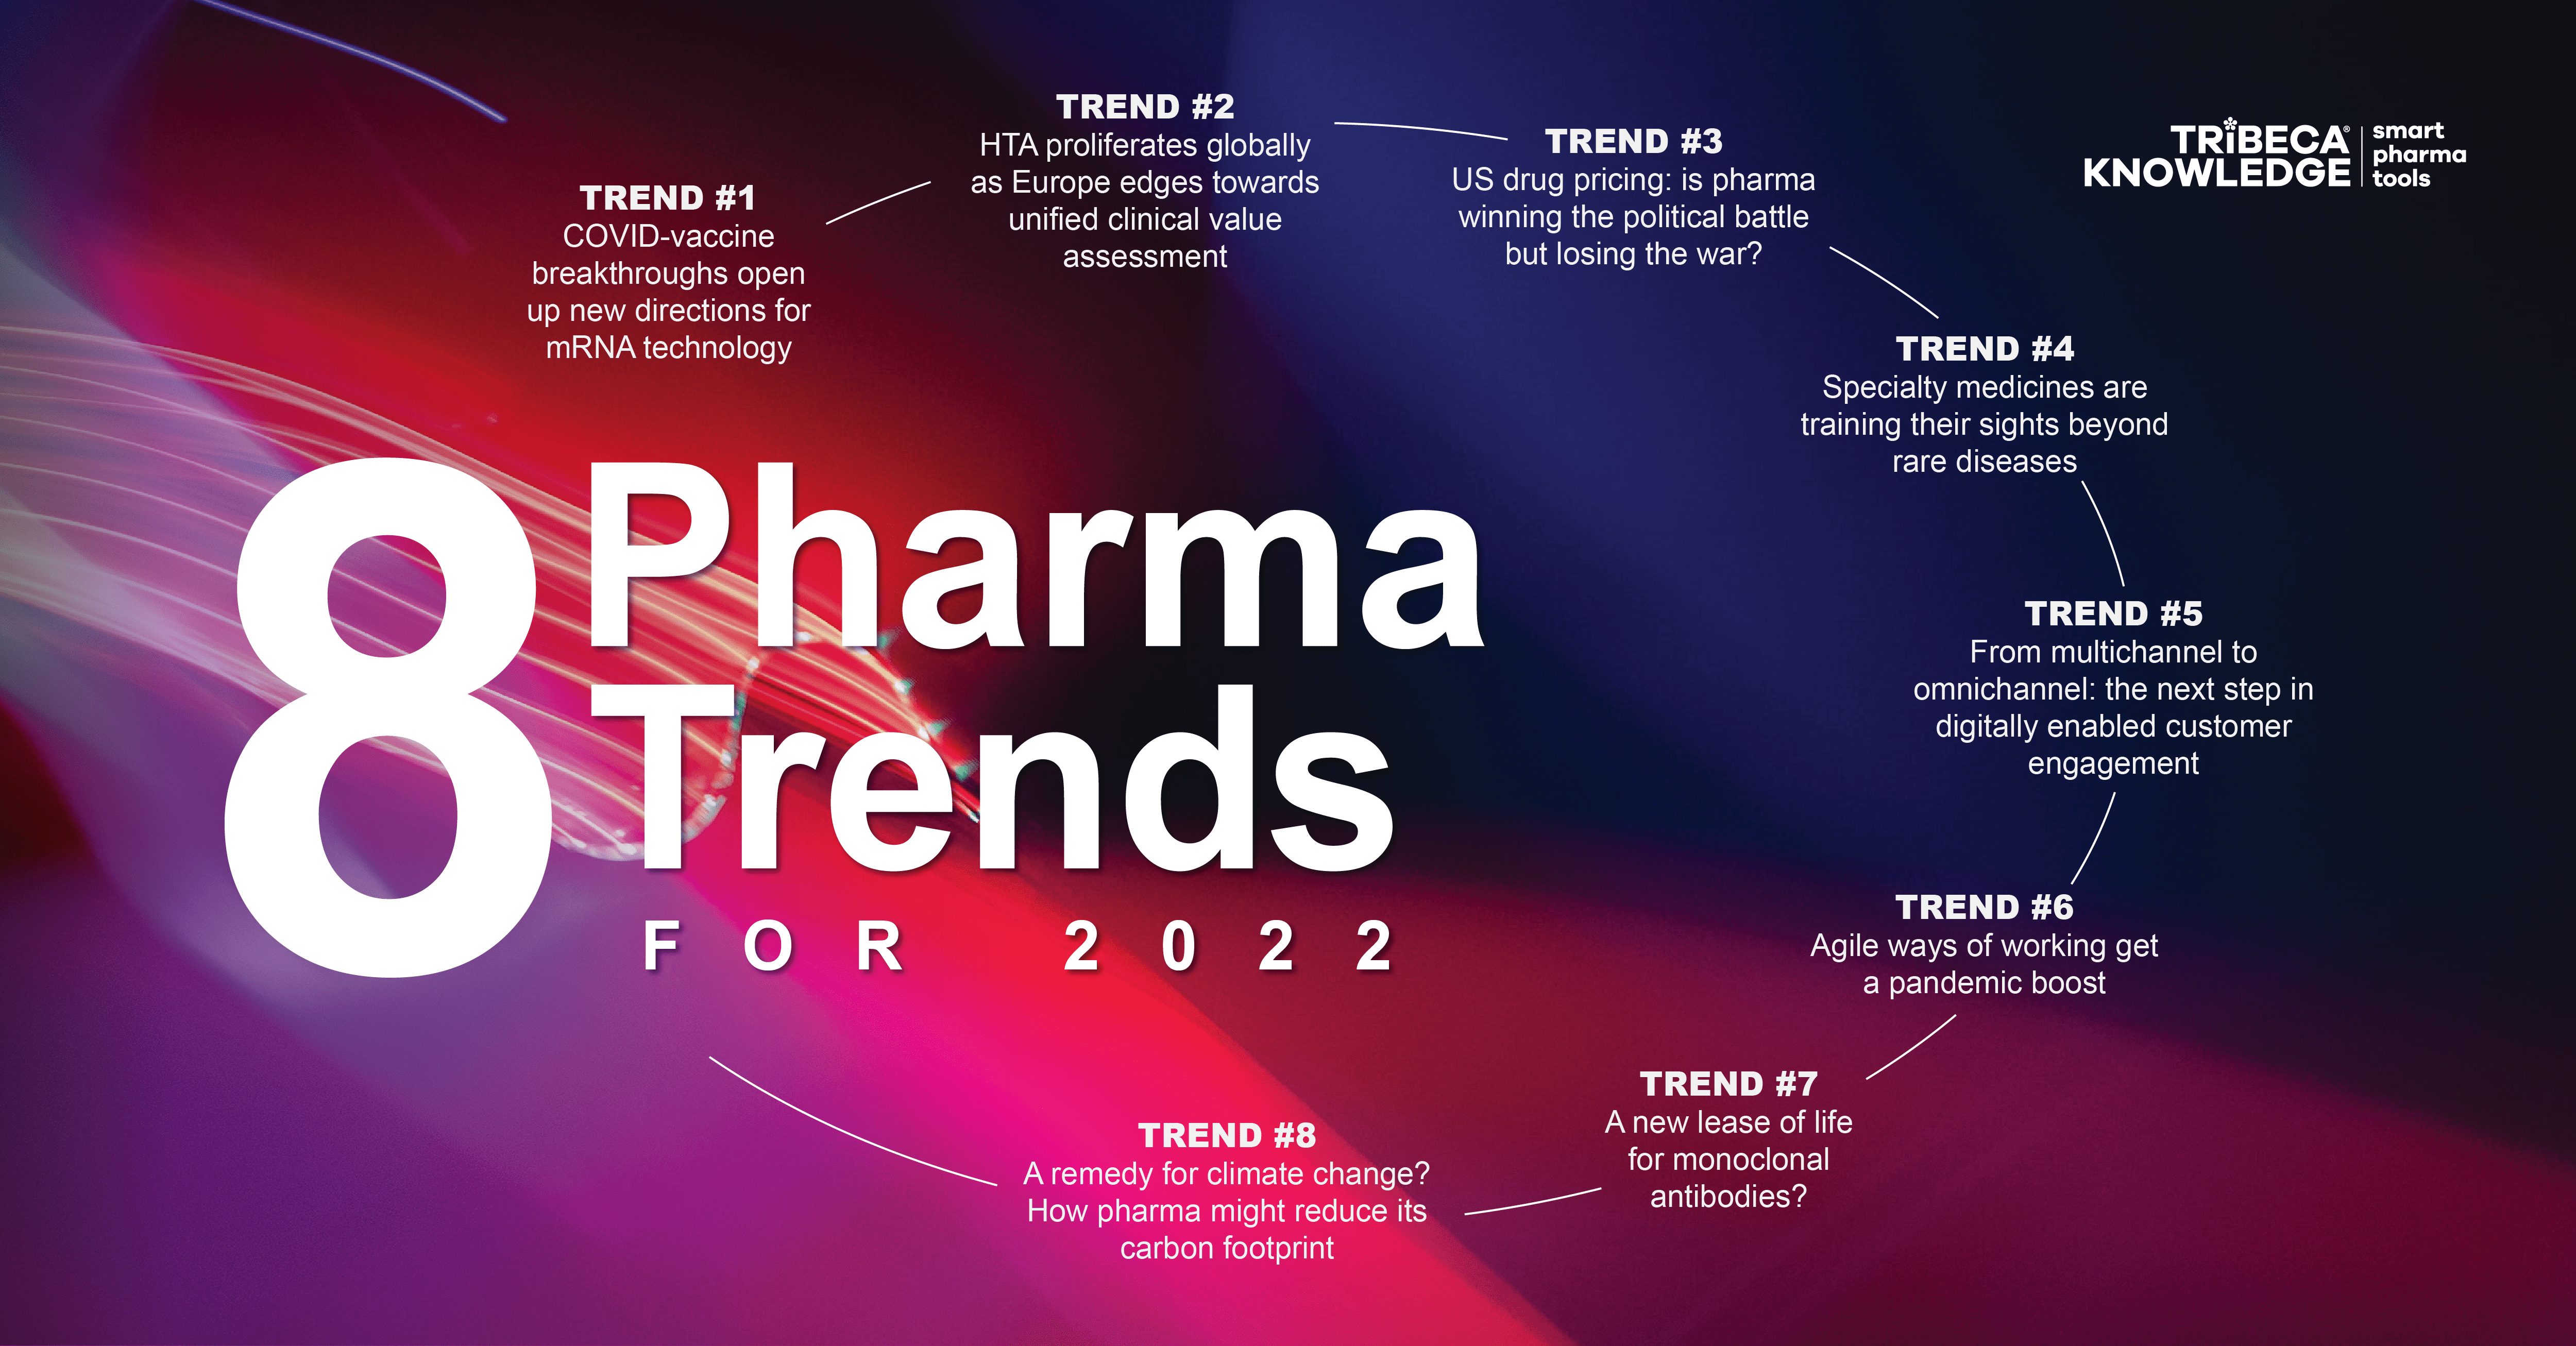 Graphic banner showing TRiBECA Knowledge's 8 Pharma Trends for 2022